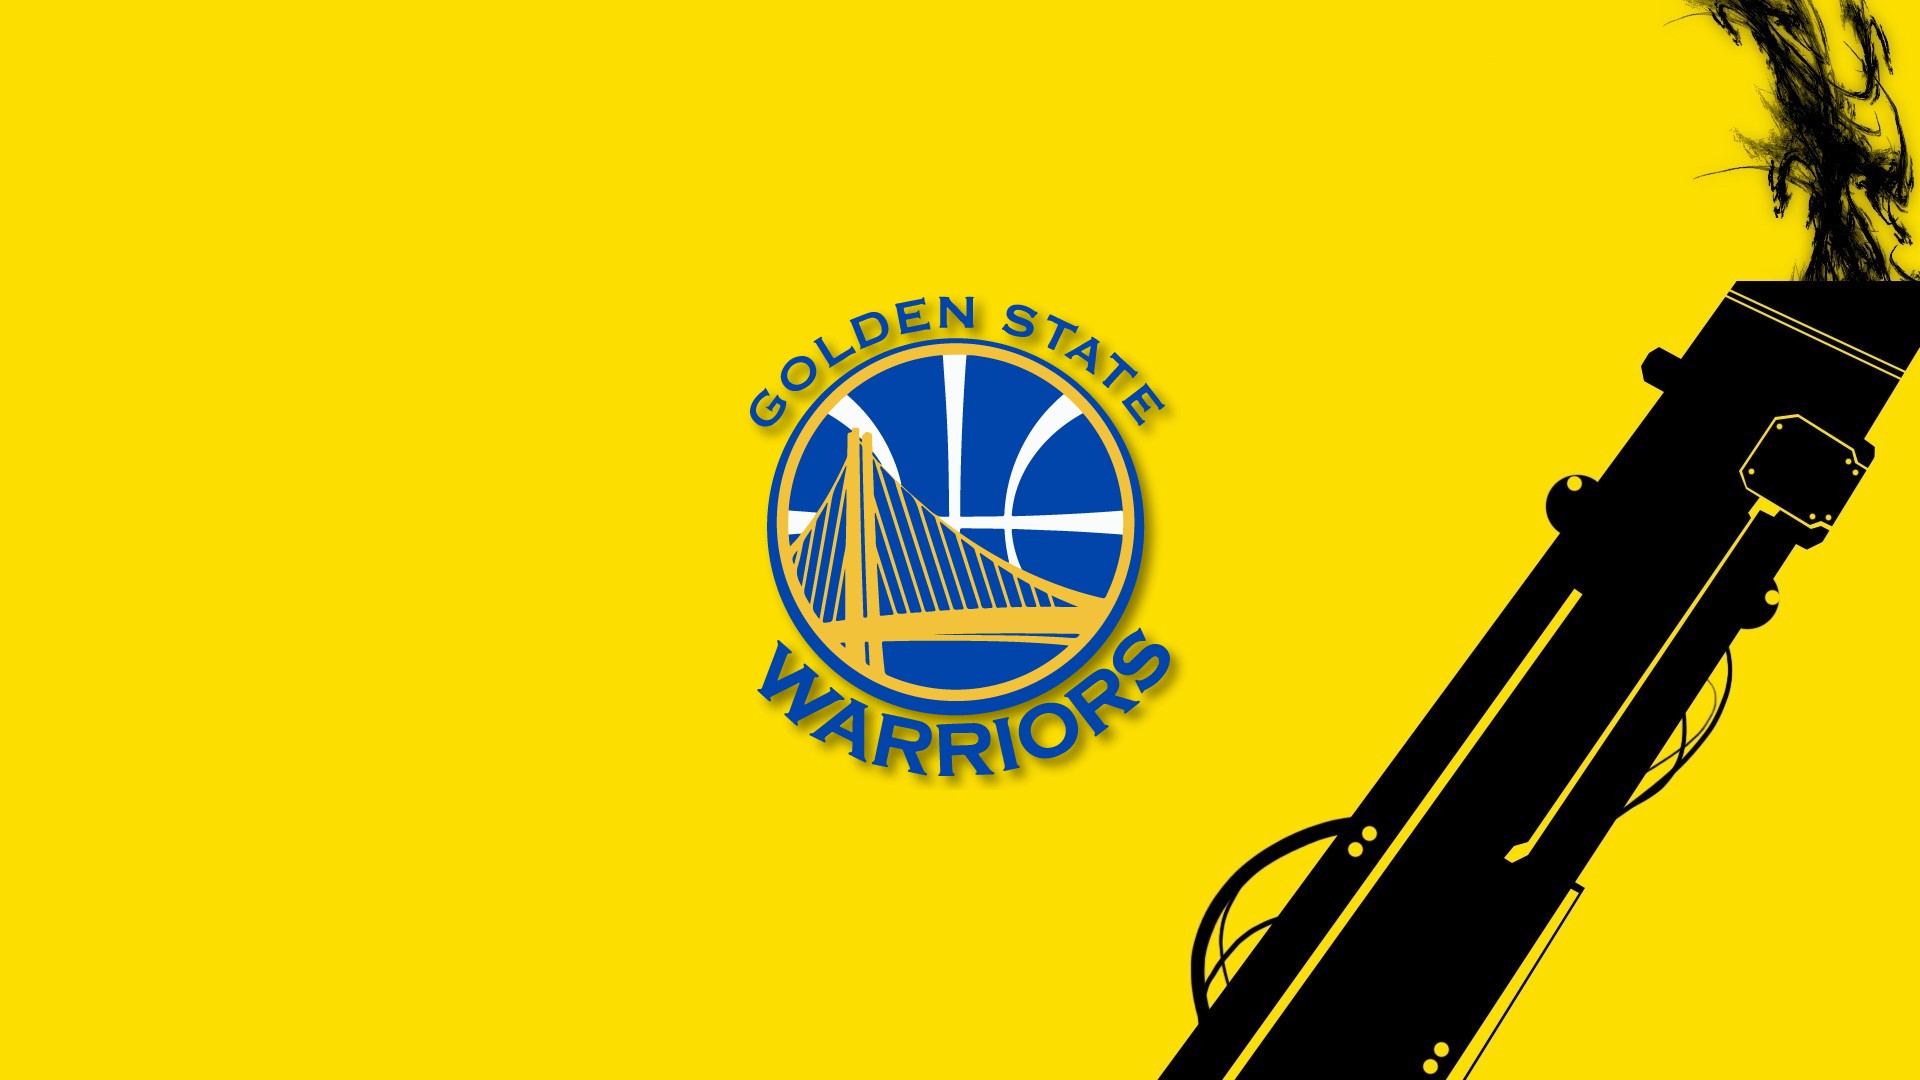 Cool Golden State Warriors Wallpaper Hd With Resolution - Iphone Golden  State Warriors Logo - 1920x1080 Wallpaper 